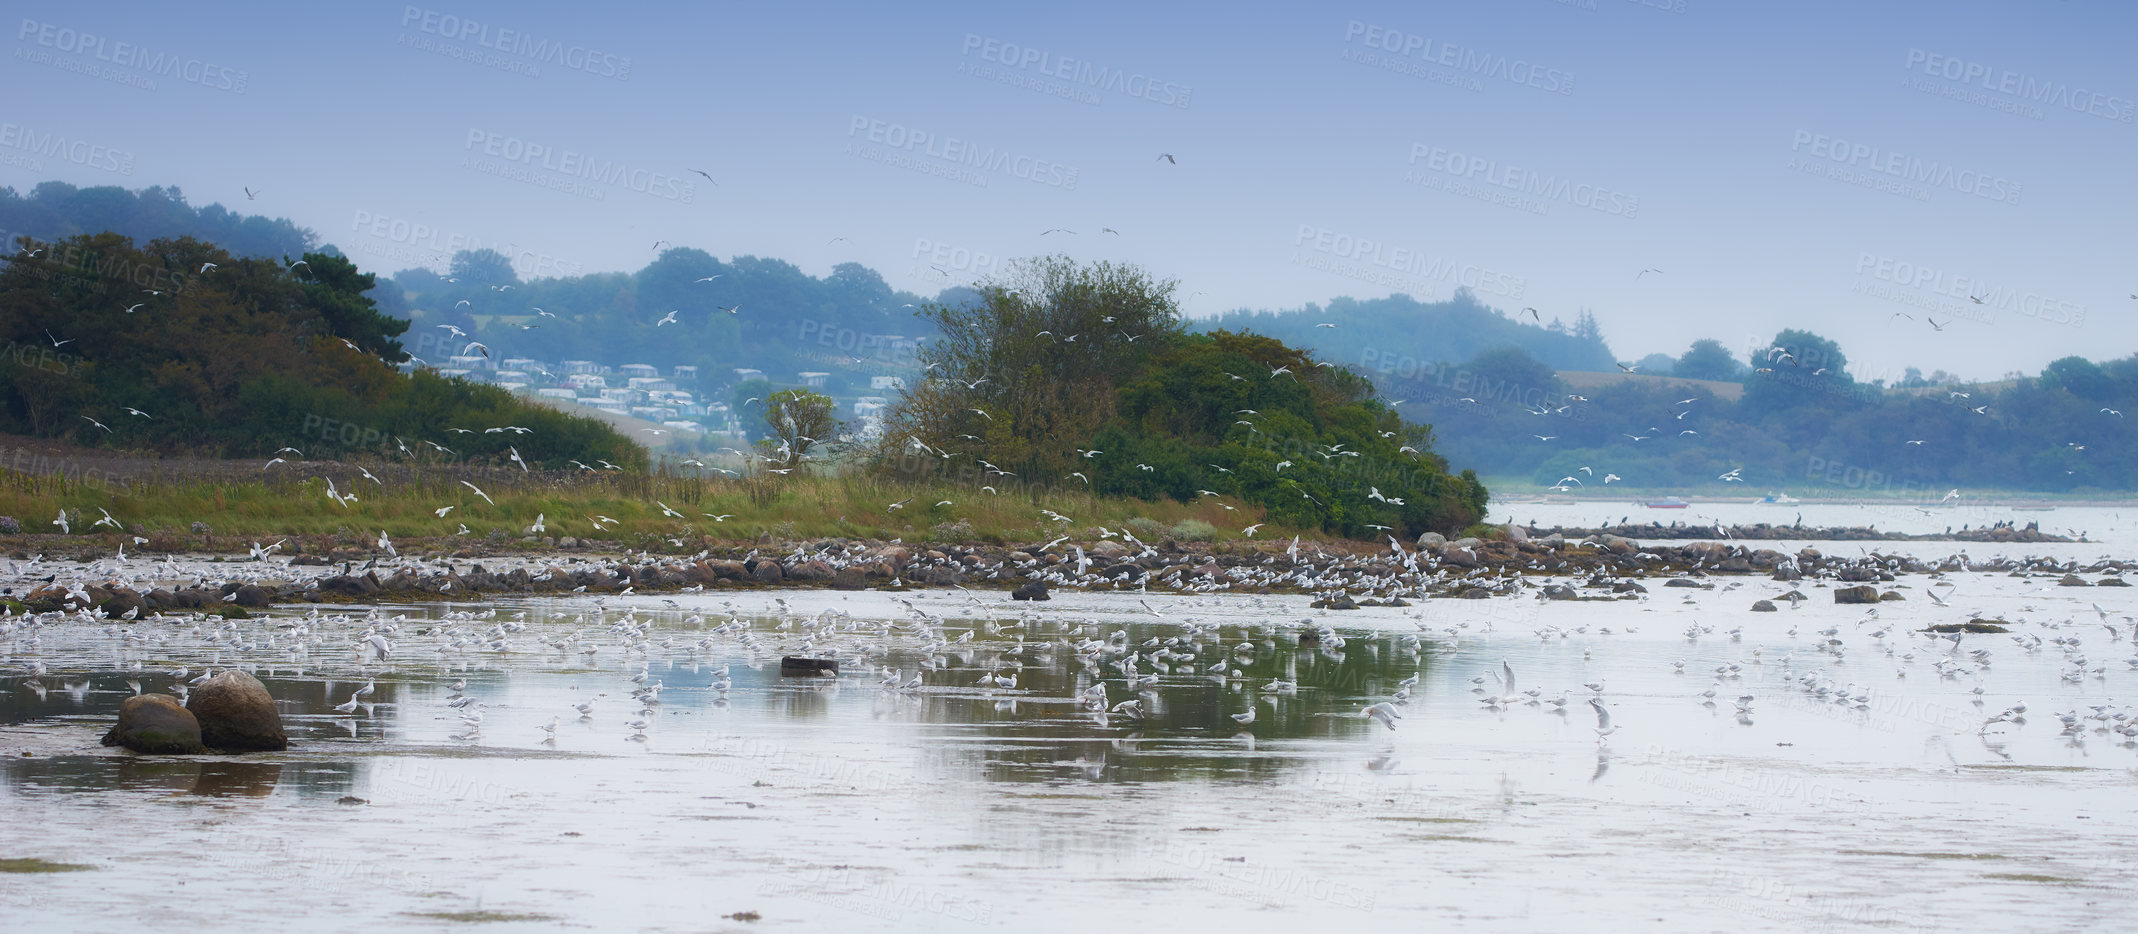 Buy stock photo Flock of seagulls flying over sea water in remote coastal city abroad and overseas. Group of white birds soaring, searching for nesting grounds. Birdwatching migratory avian wildlife looking for food